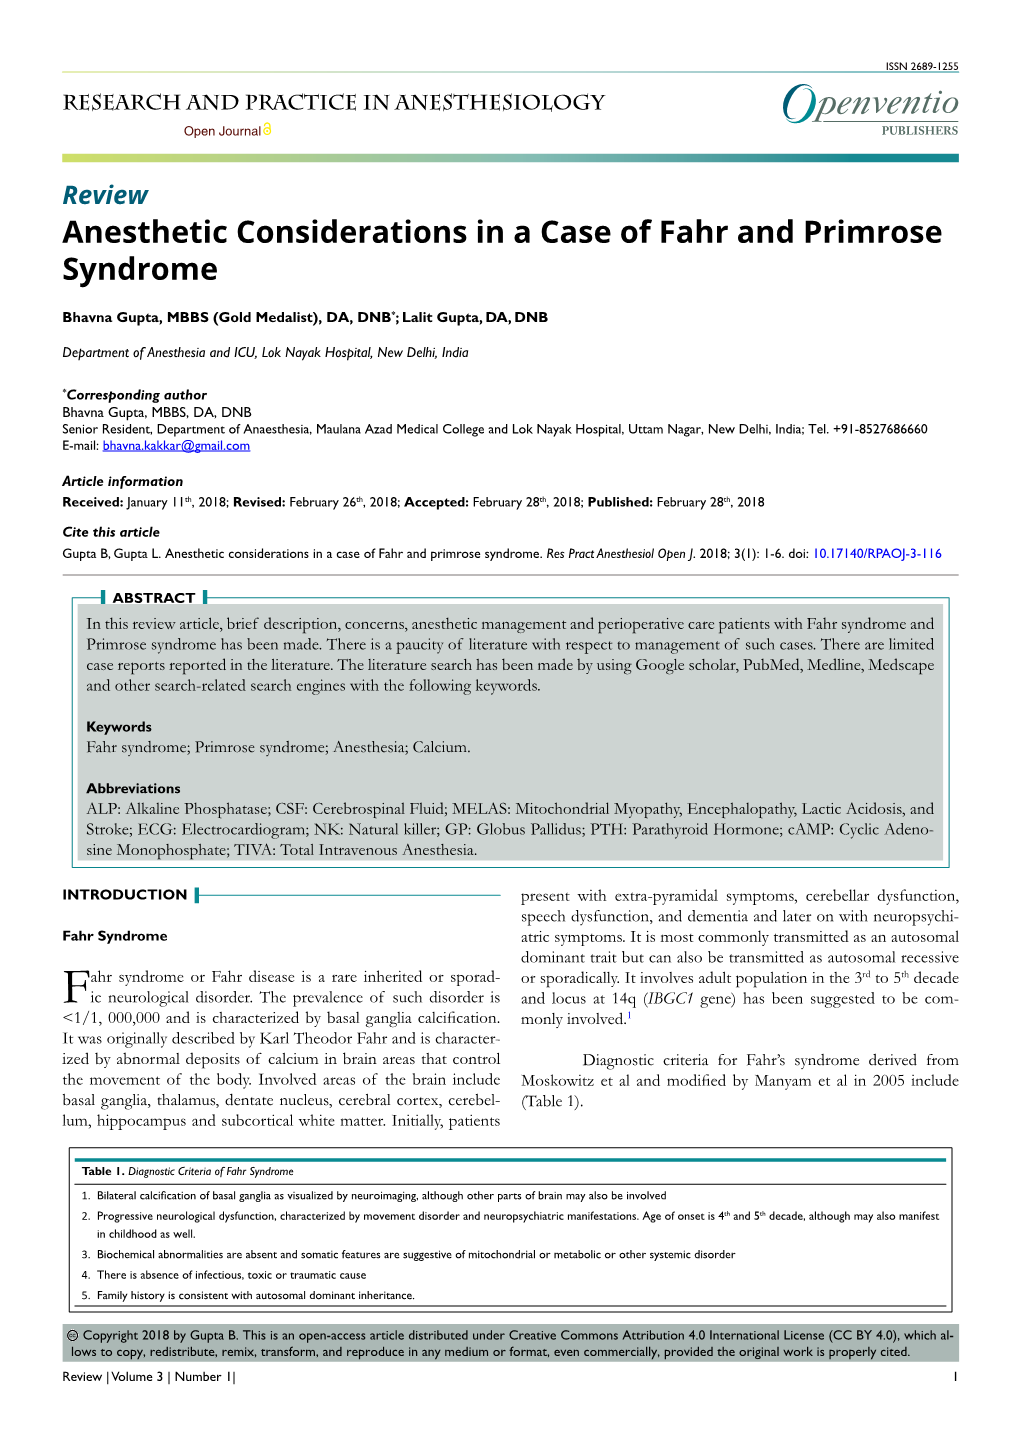 Anesthetic Considerations in a Case of Fahr and Primrose Syndrome